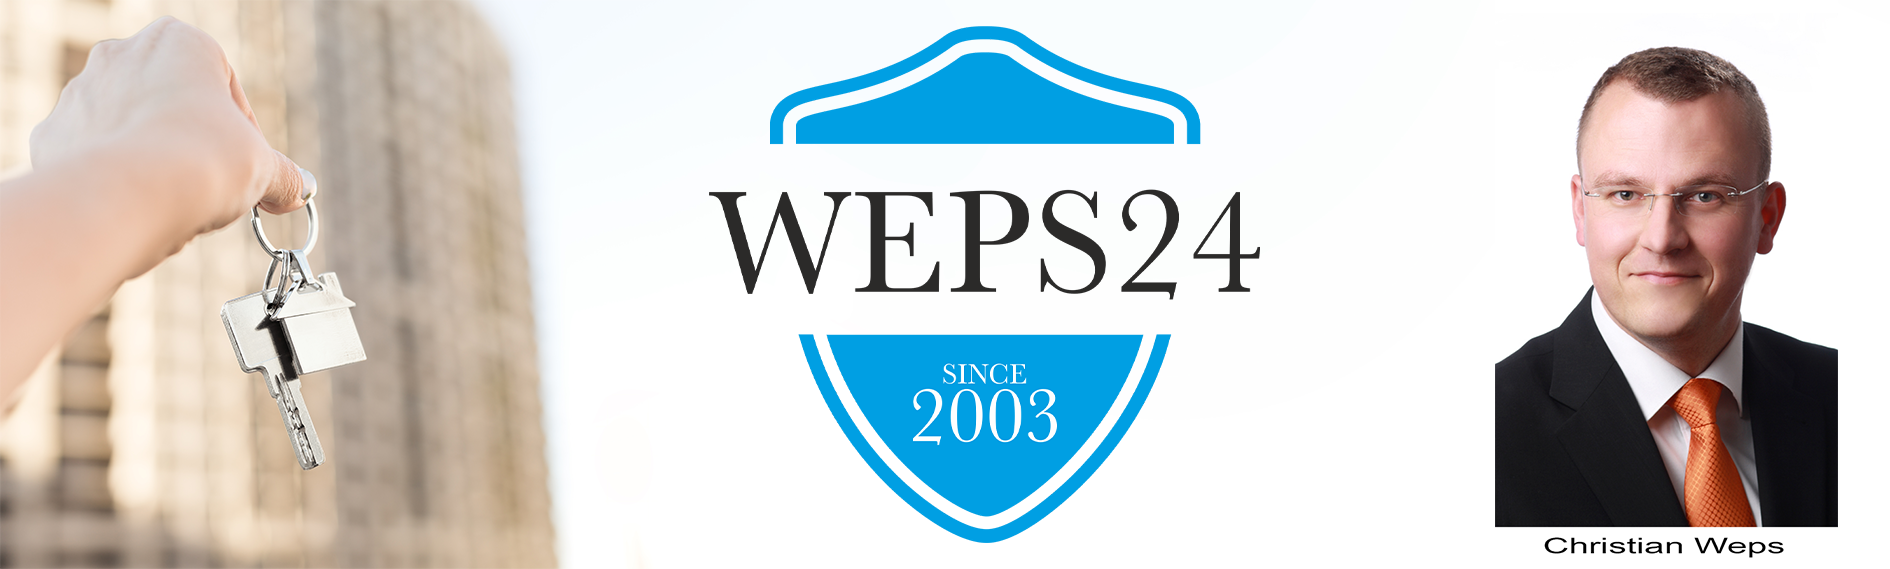 weps24